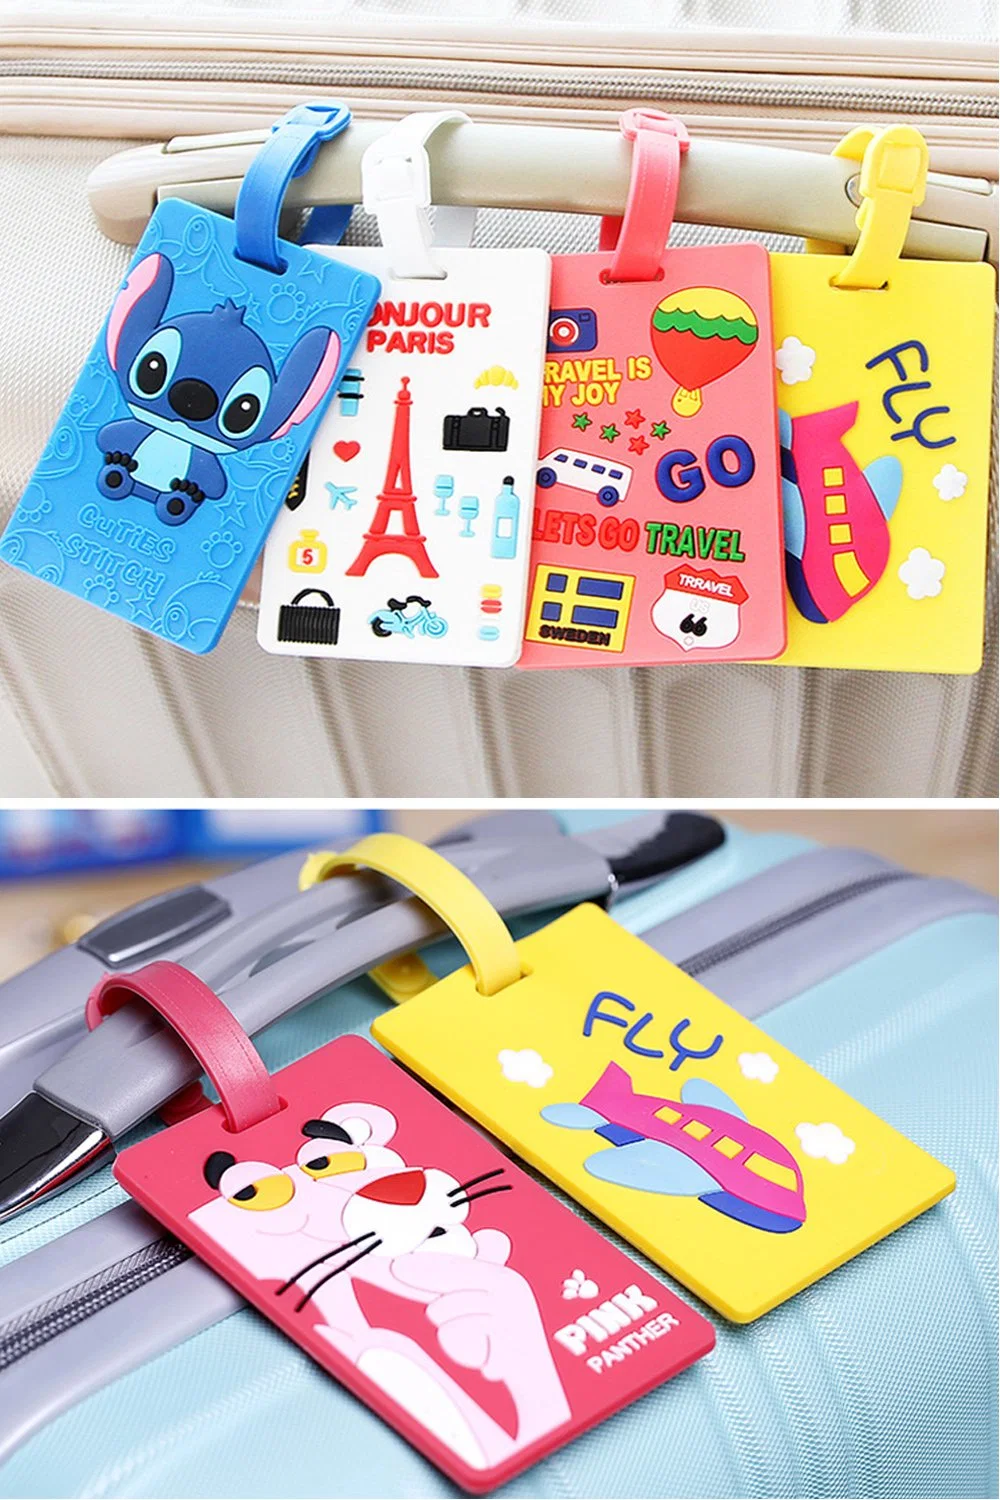 Wholesale Personalized Promotional Gifts Custom Golf Bag Baggage Accessories Embroidery Sublimation Travel Key Silicone Plastic PVC PU Leather Metal Luggage Tag